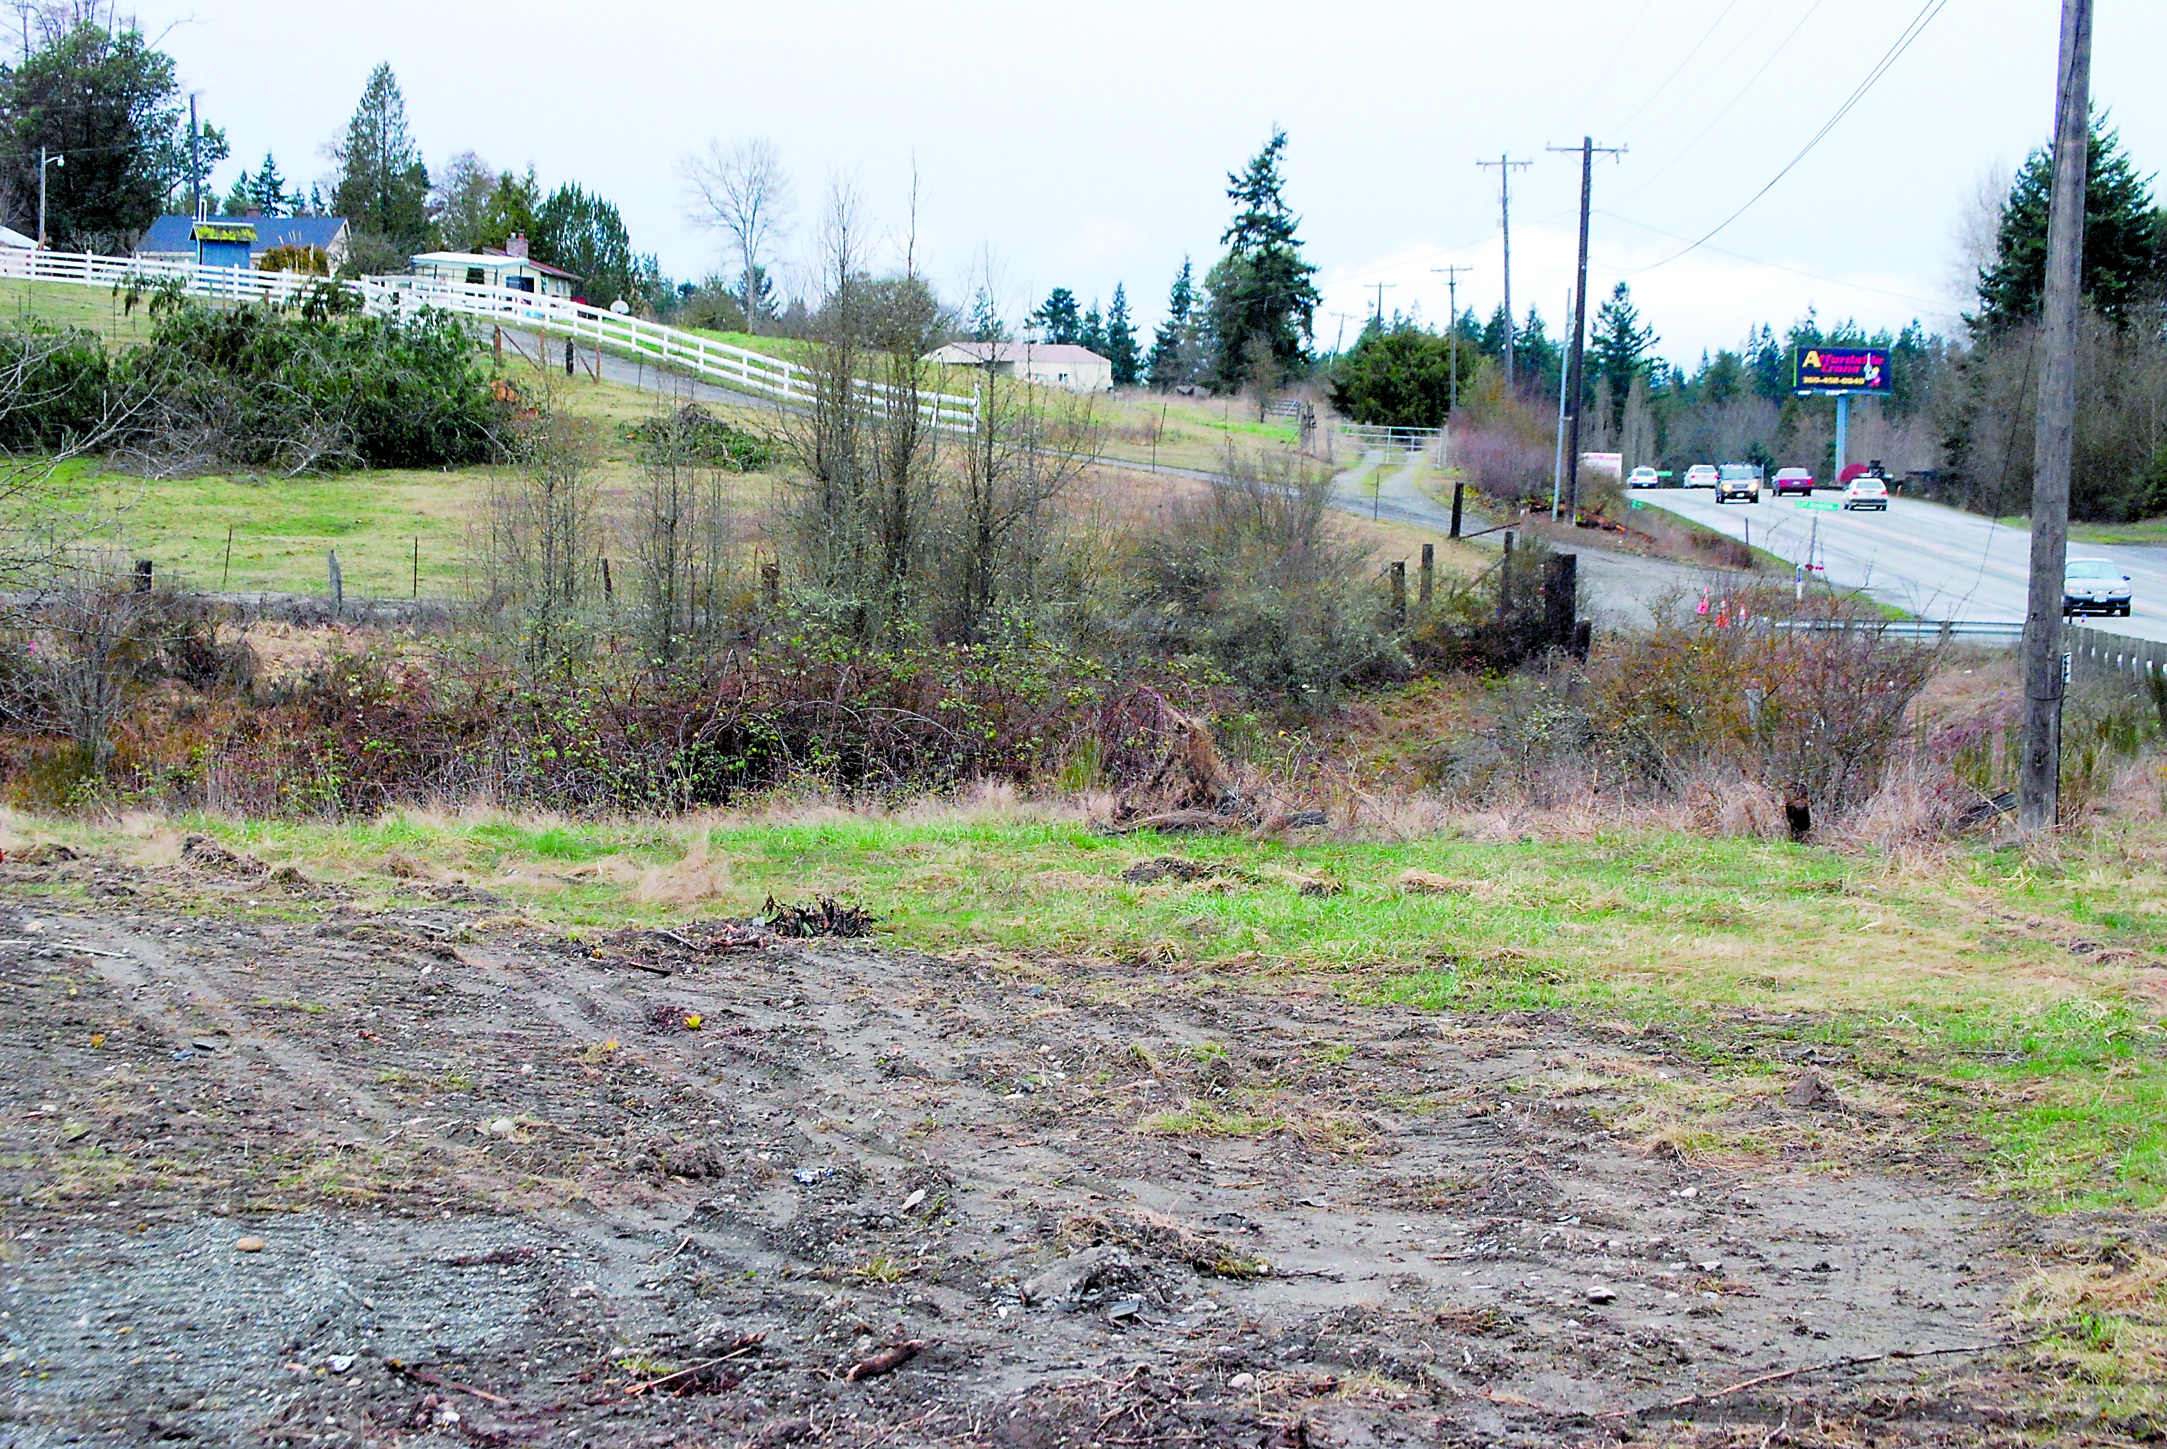 Signs of clearing along the future widened route of U.S. Highway 101 between Sequim and Port Angeles include this former home site. Jeff Chew/Peninsula Daily News